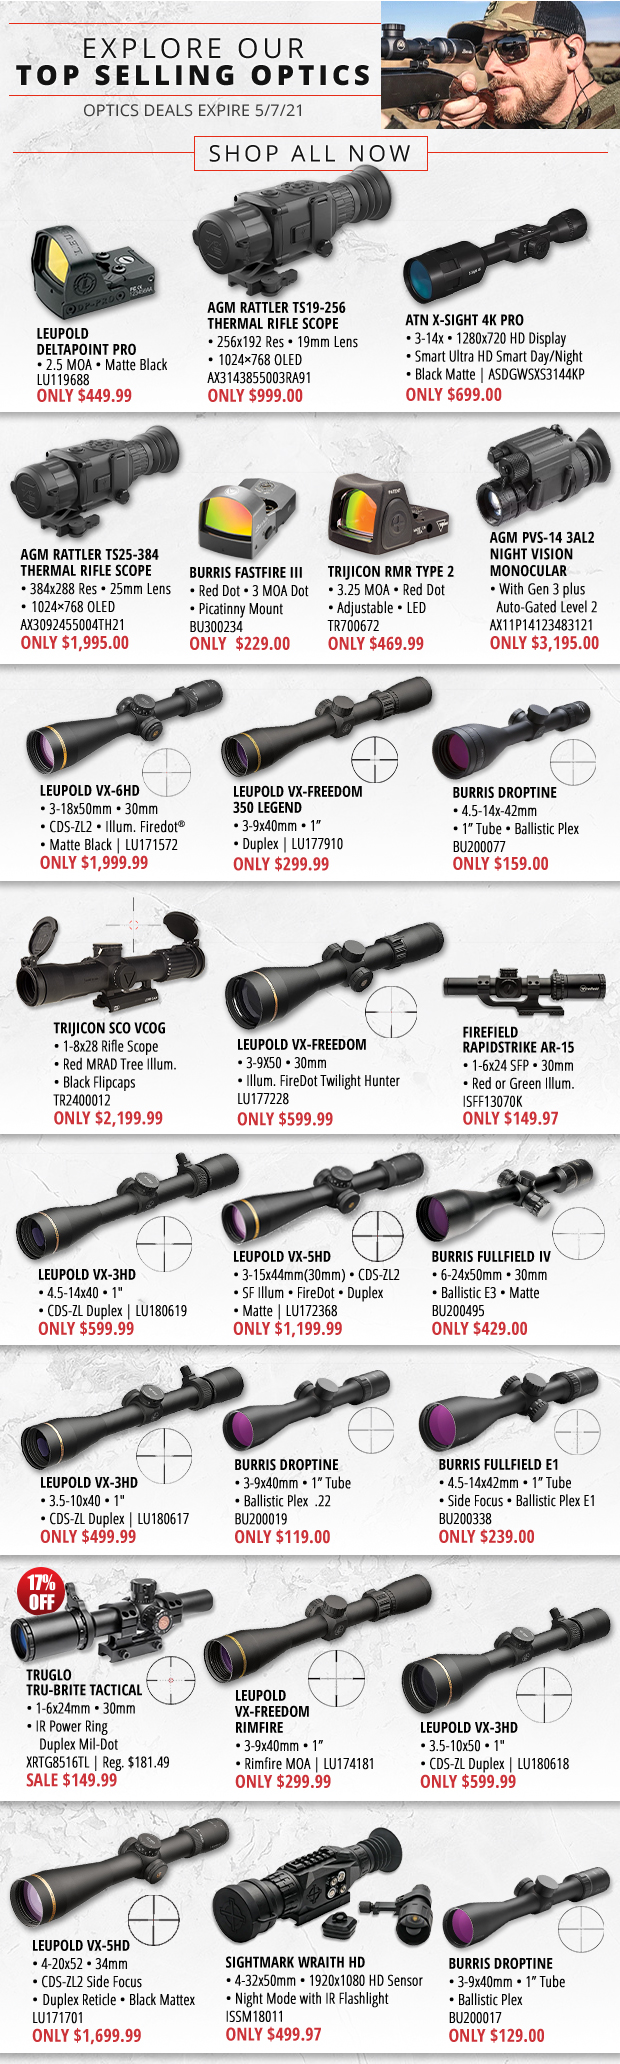 Shop Our Top Selling Optics